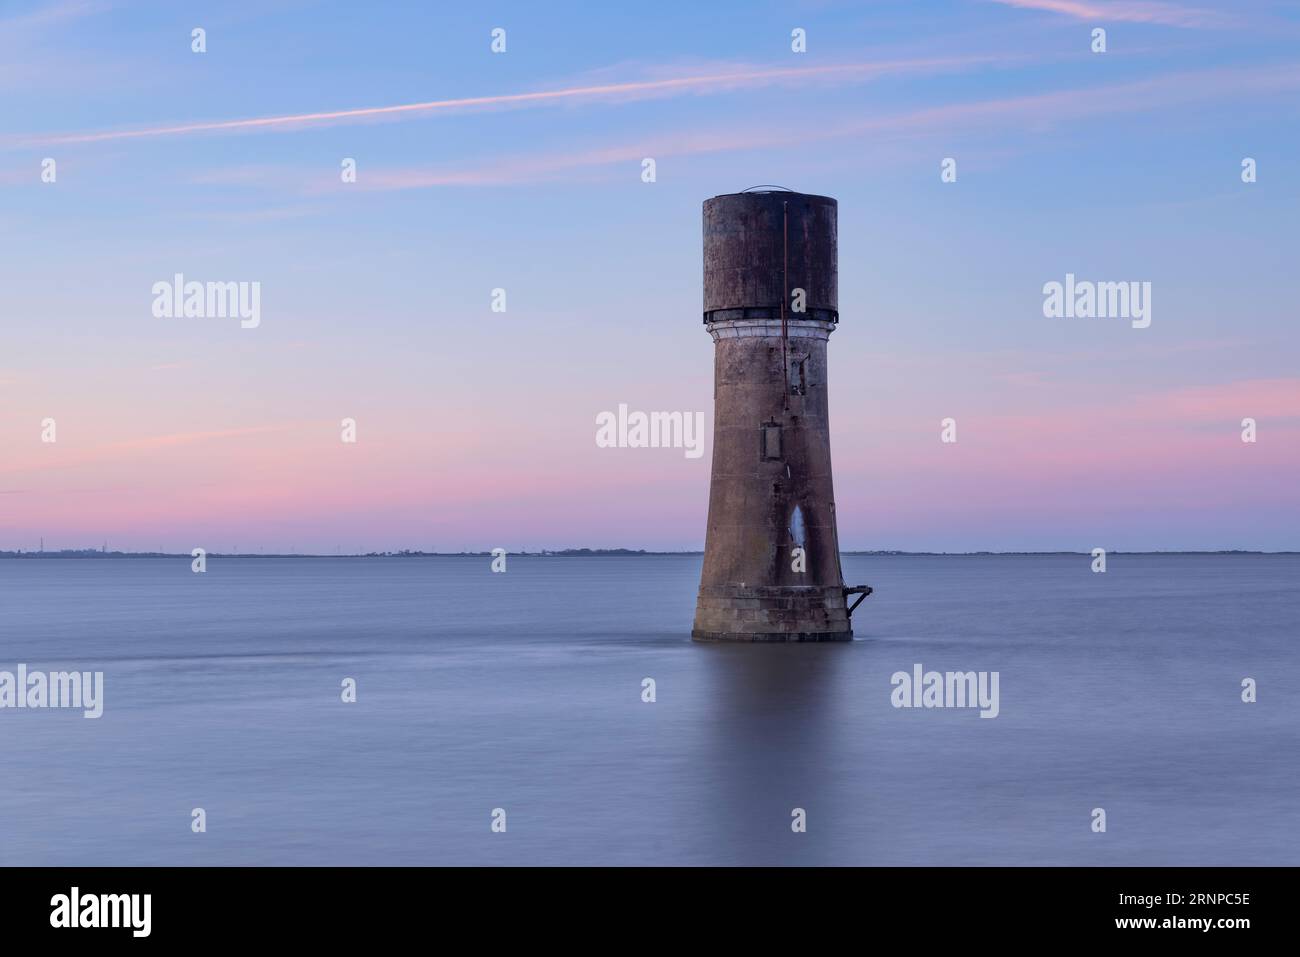 The decommissioned lighthouse in the mouth of the Humber estuary at Spurn Point, Humberside, East Yorkshire, UK Stock Photo